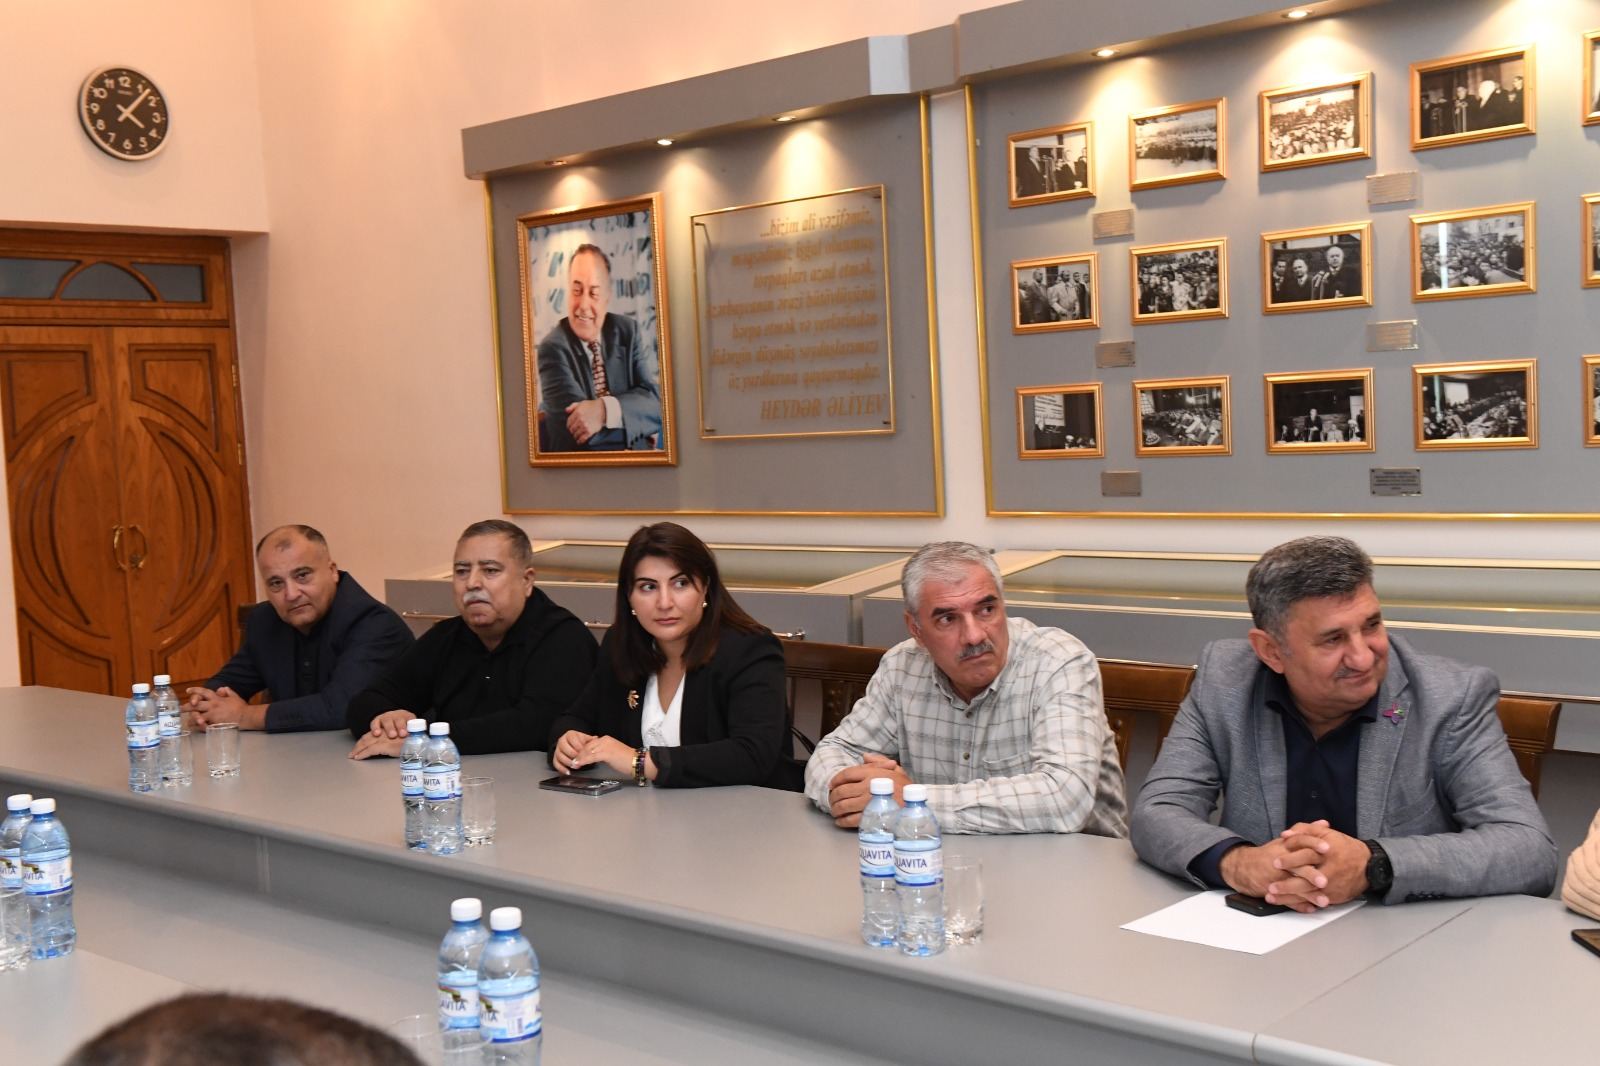 Azerbaijani IDPs from Khankendi also to join "Big Return" process - State Committee (PHOTO)